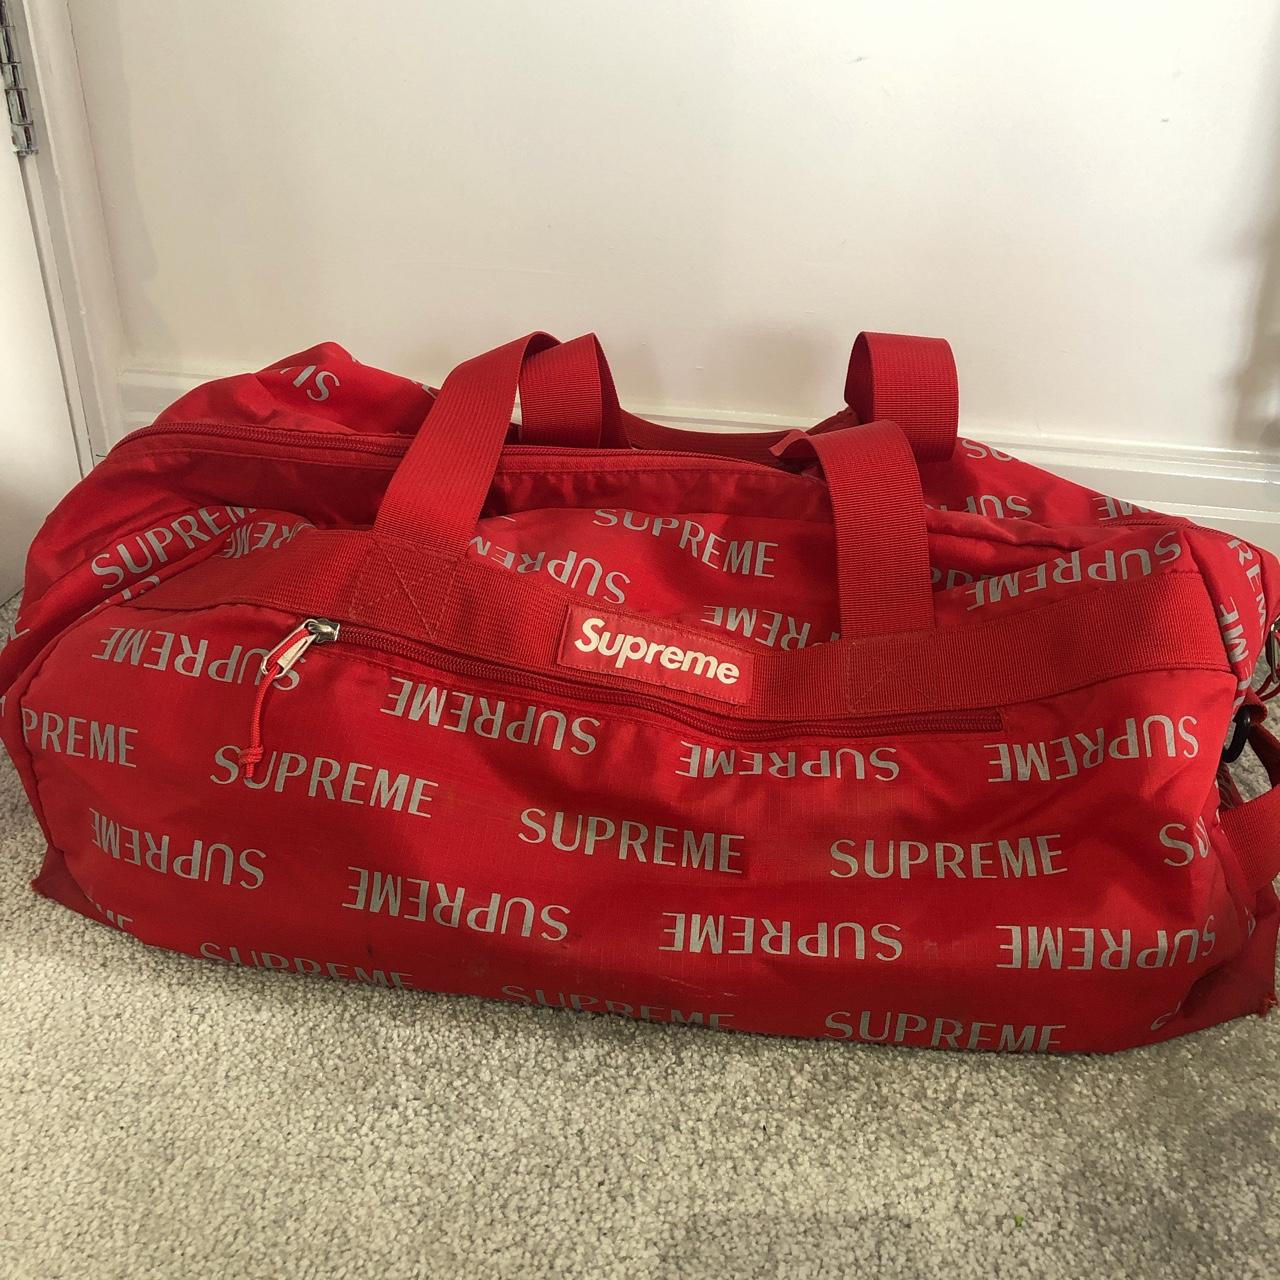 Supreme 3M Reflective Repeat Duffle Bag in red... - Depop